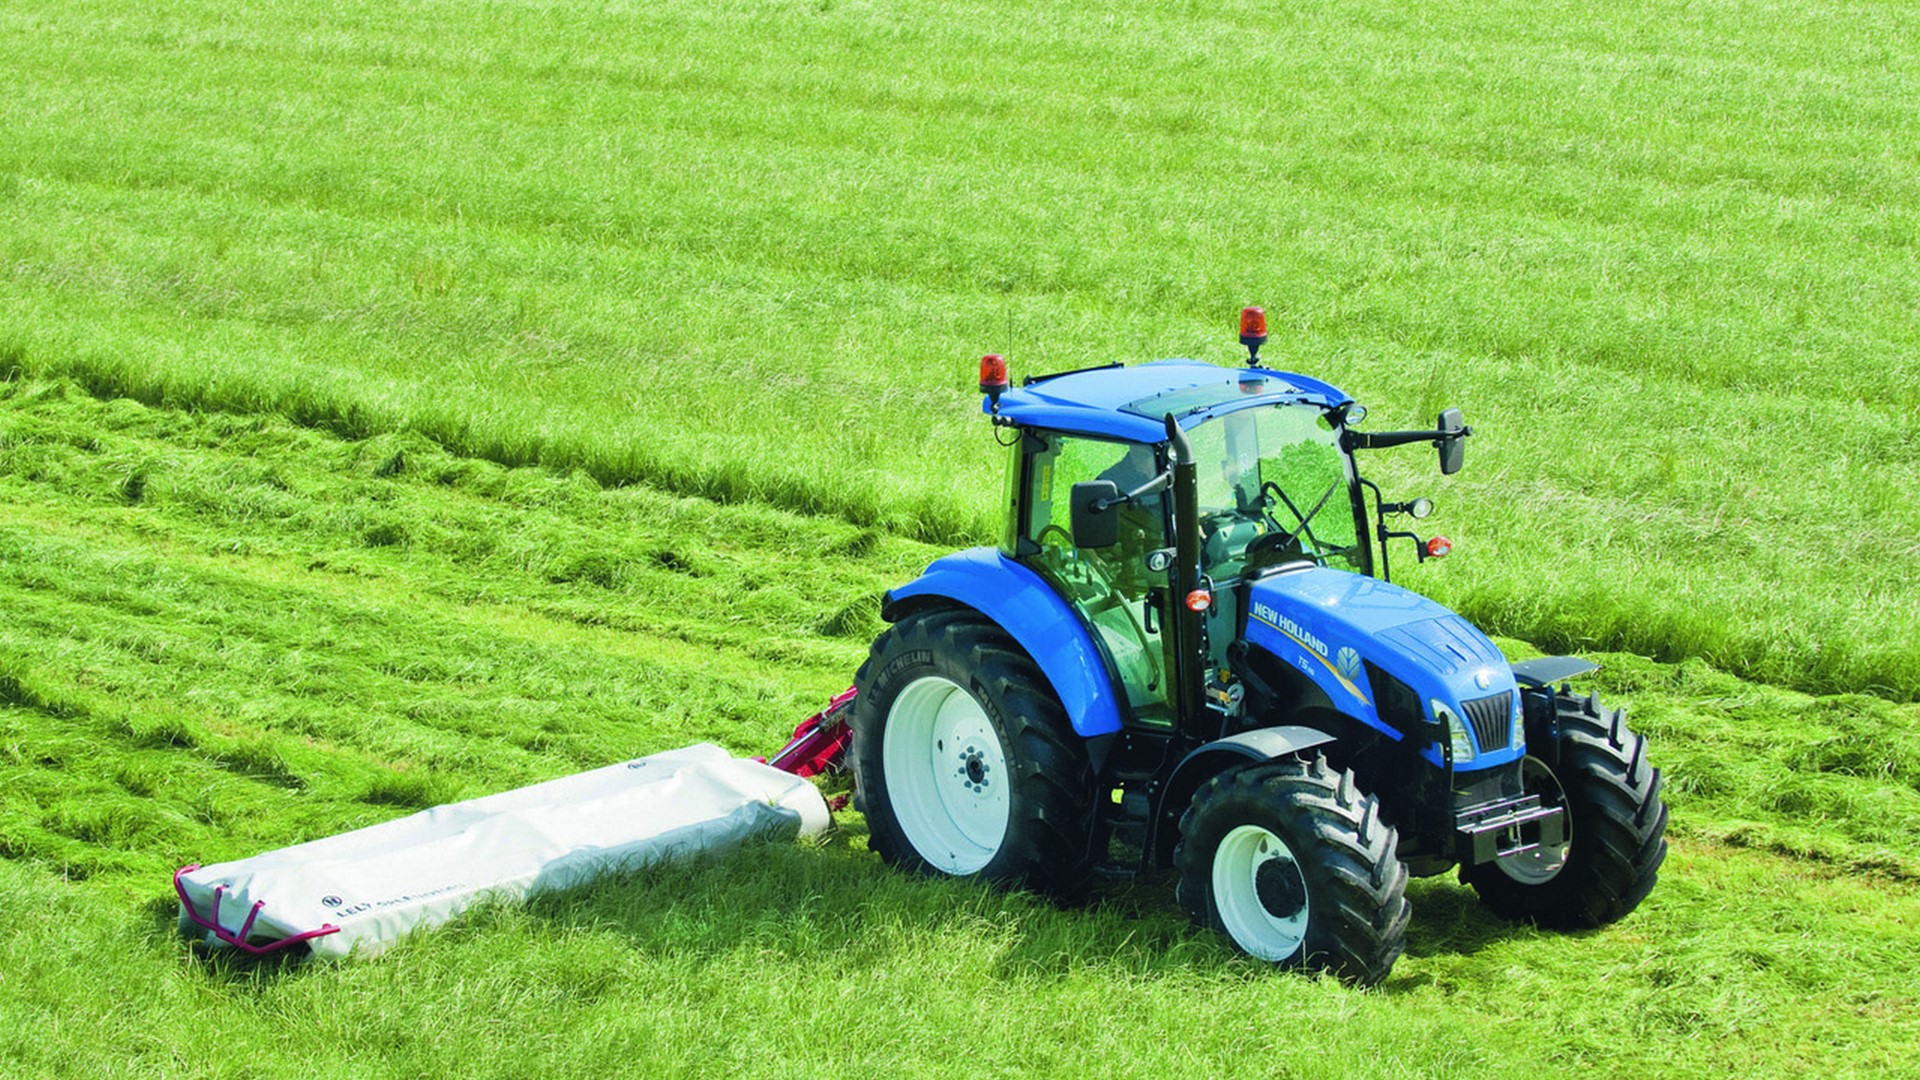 New Holland T5.115 mowing